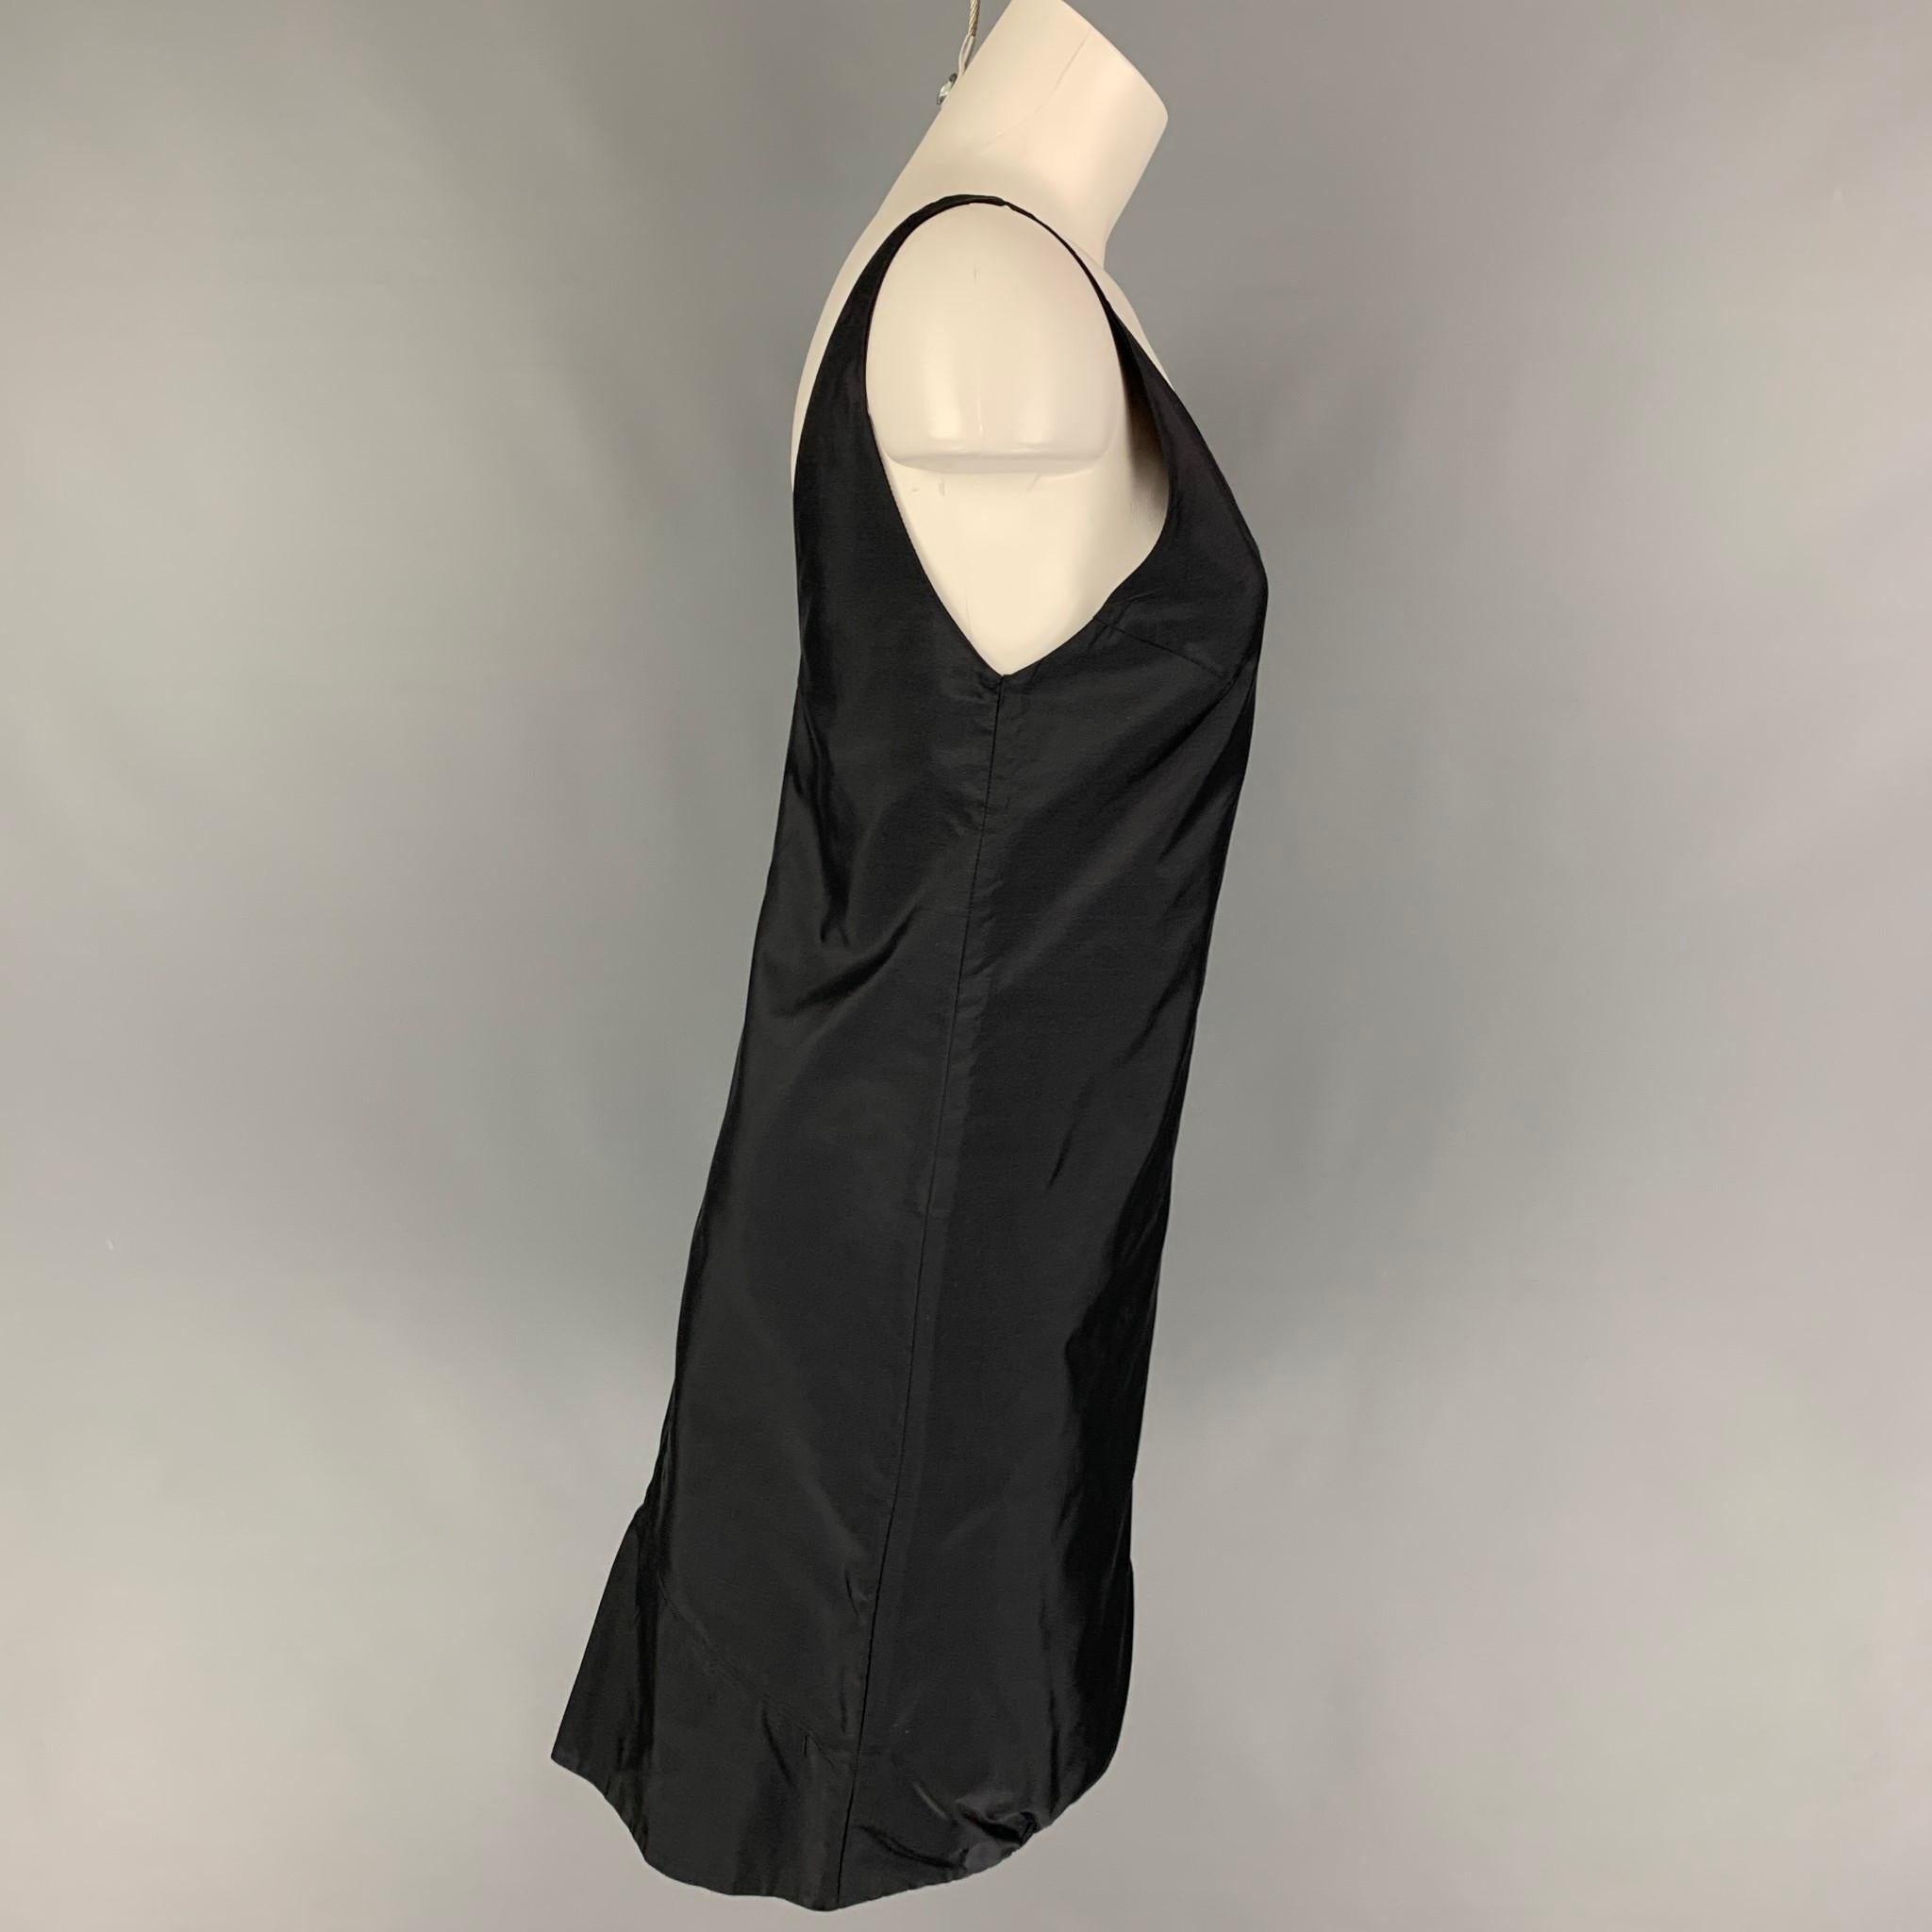 PRADA cocktail dress comes in a black silk featuring a bubble hem, v-neck, sleeveless, and a side snap button closure. Made in Italy. 

Very Good Pre-Owned Condition.
Marked: 40

Measurements:

Bust: 32 in.
Waist: 32 in.
Hip: 36 in.
Length: 36 in. 